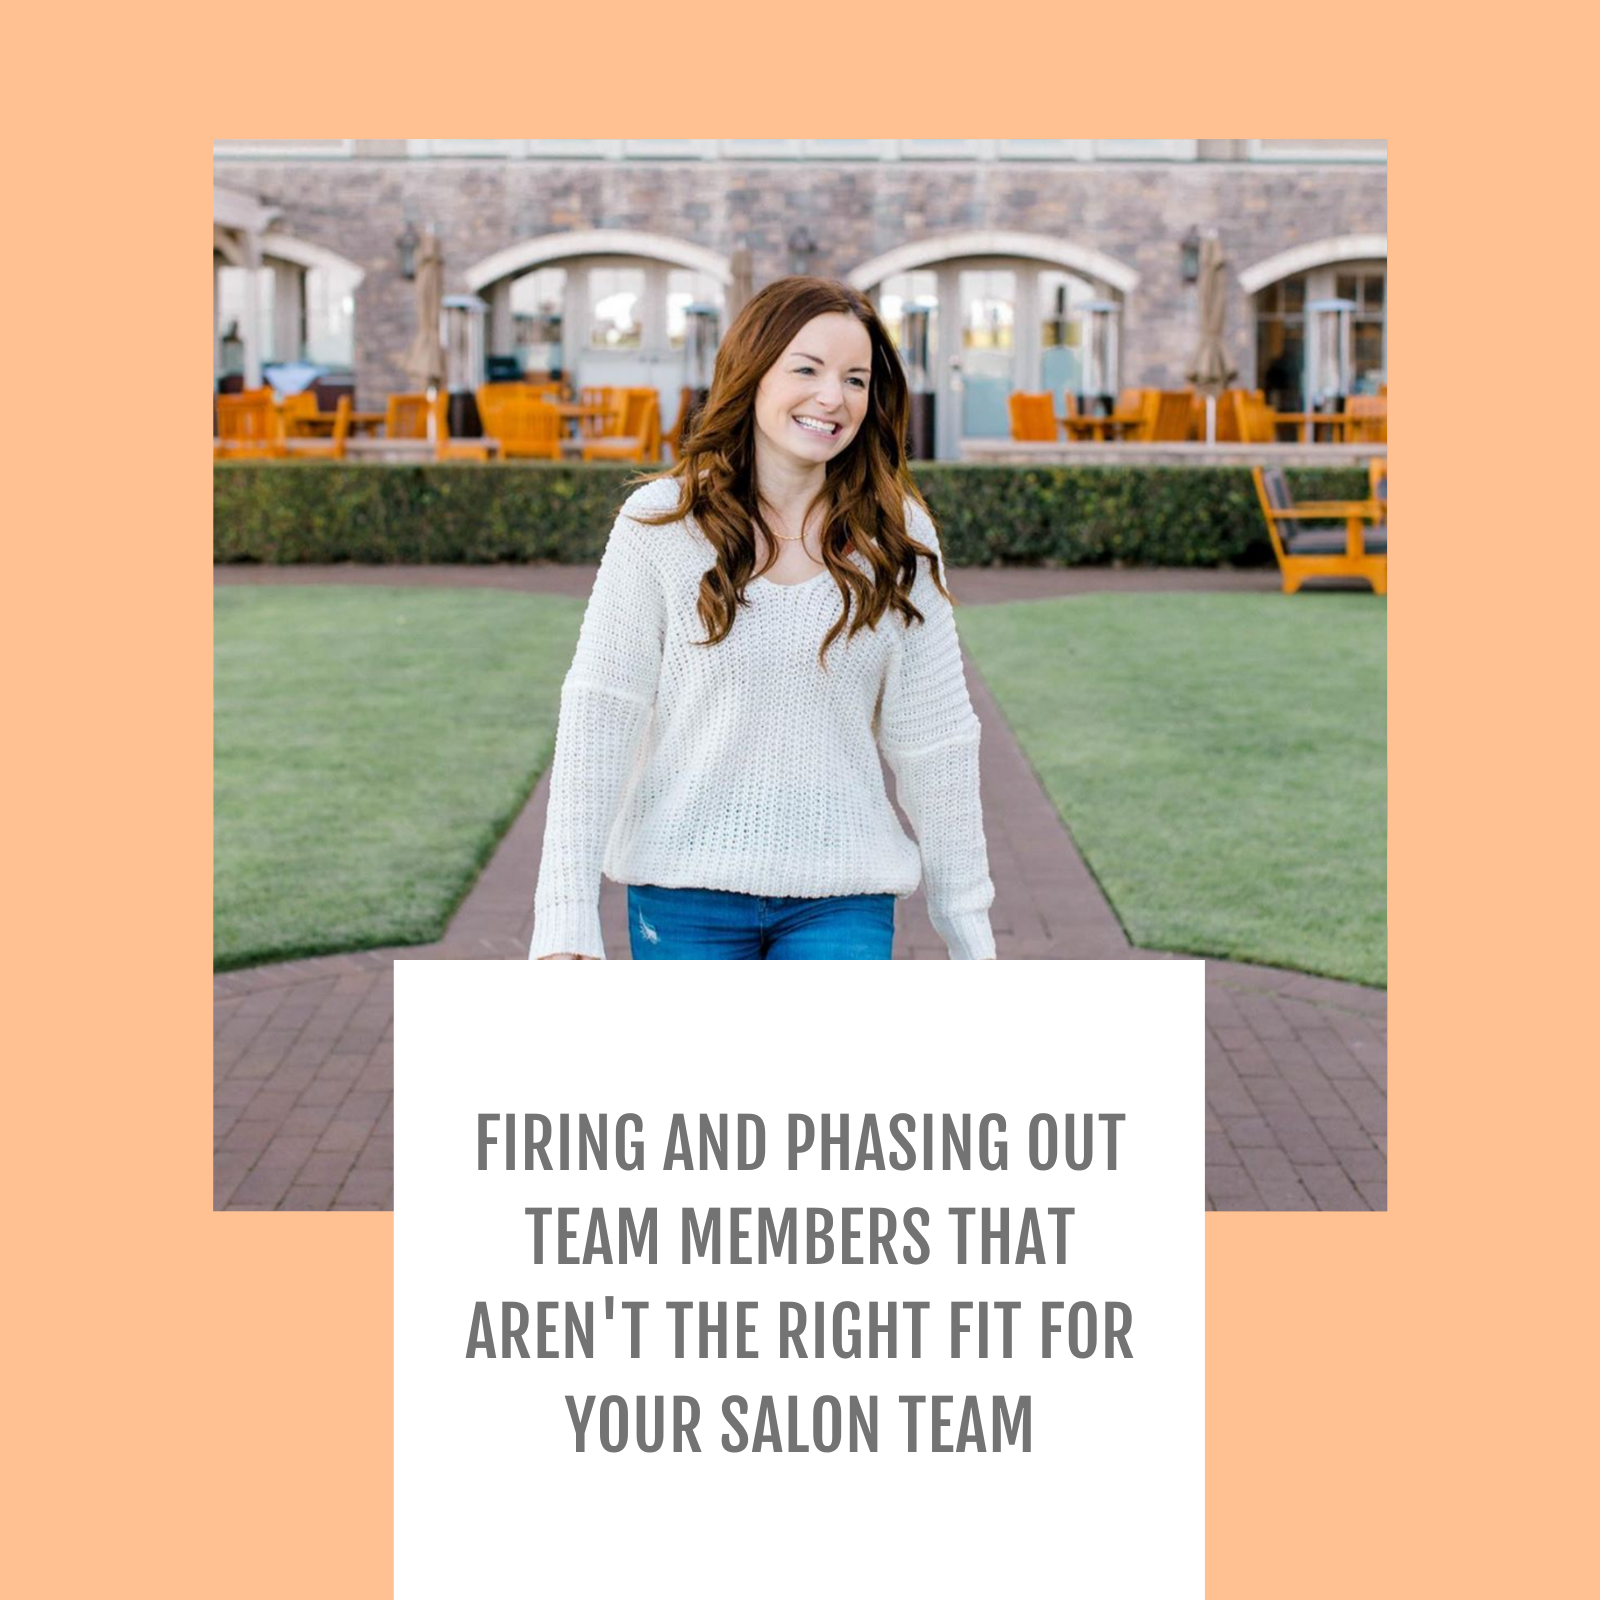 Episode #52-Firing and phasing out team members that aren't the right fit for your salon team